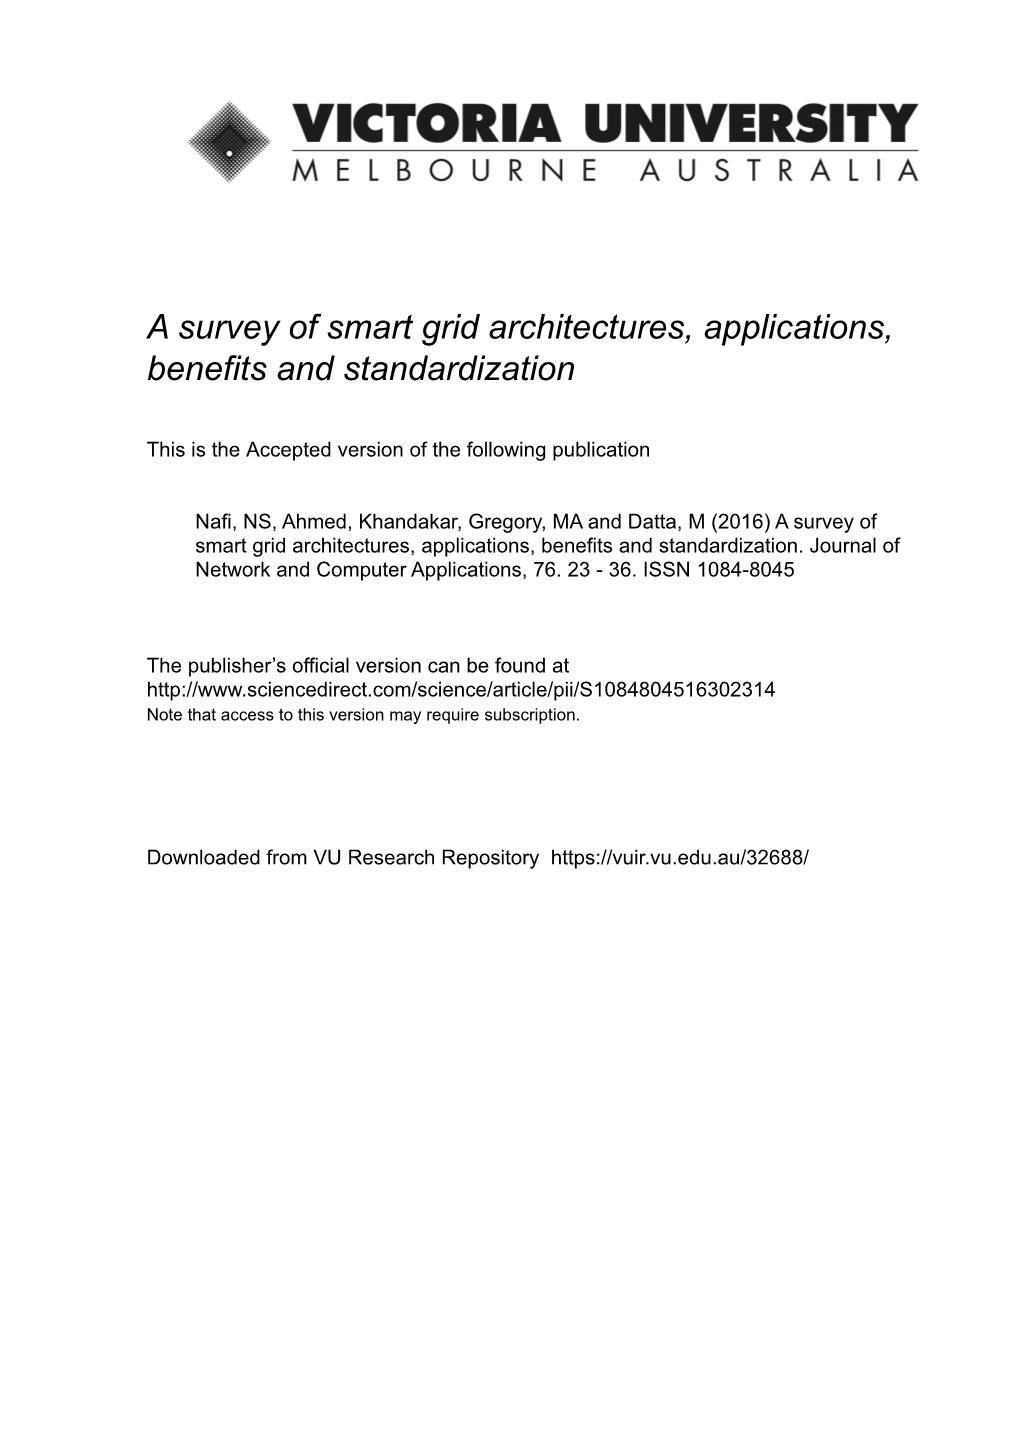 A Survey of Smart Grid Architectures, Applications, Benefits and Standardization